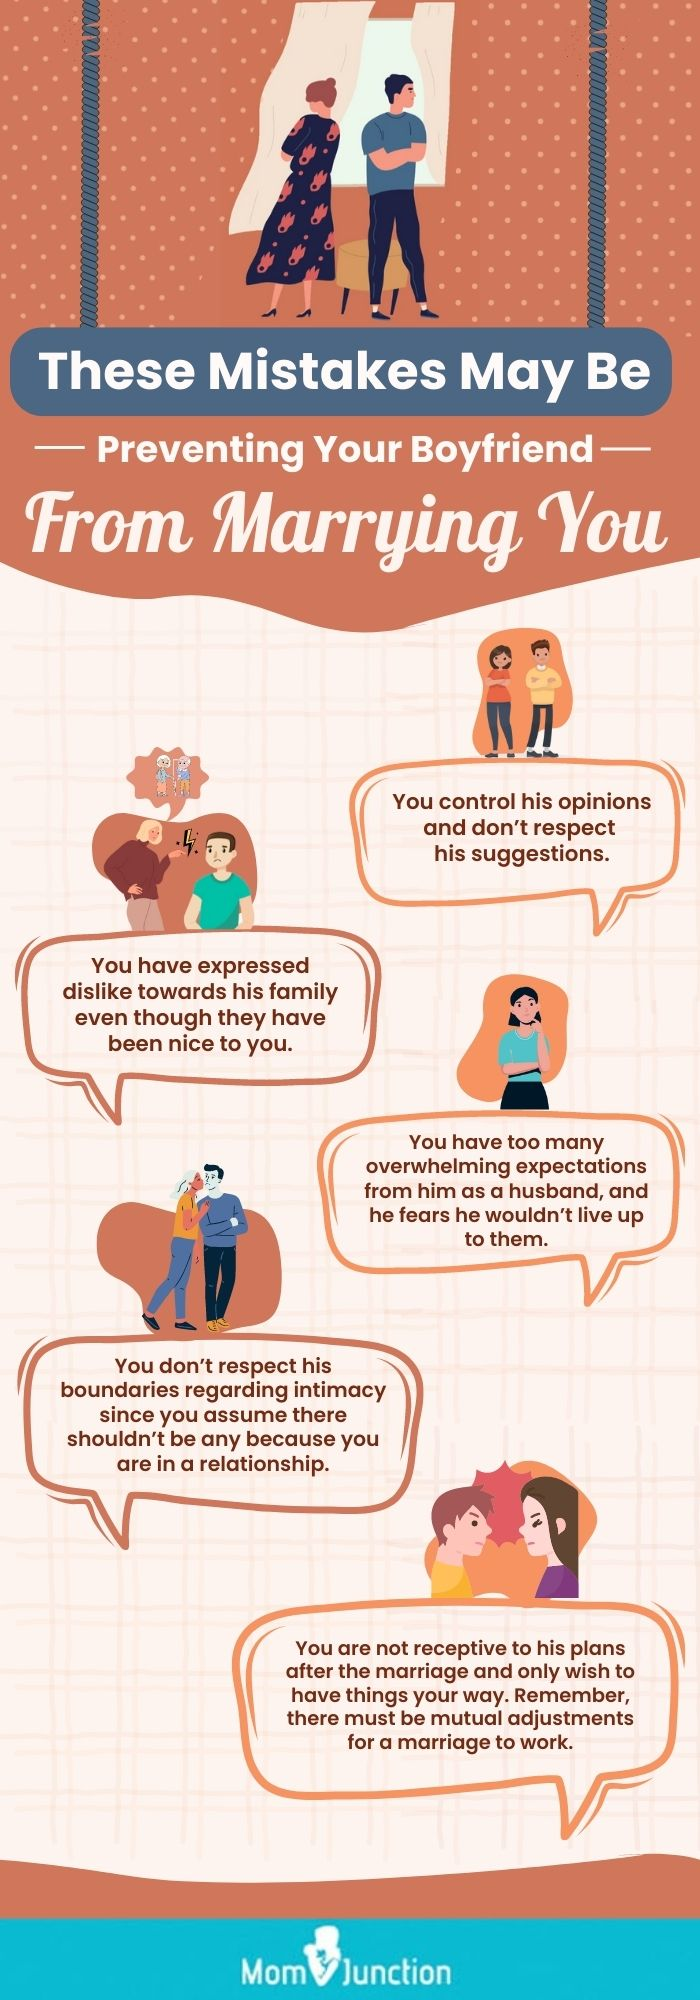 these mistakes may be preventing your boyfriend from marrying you (infographic)